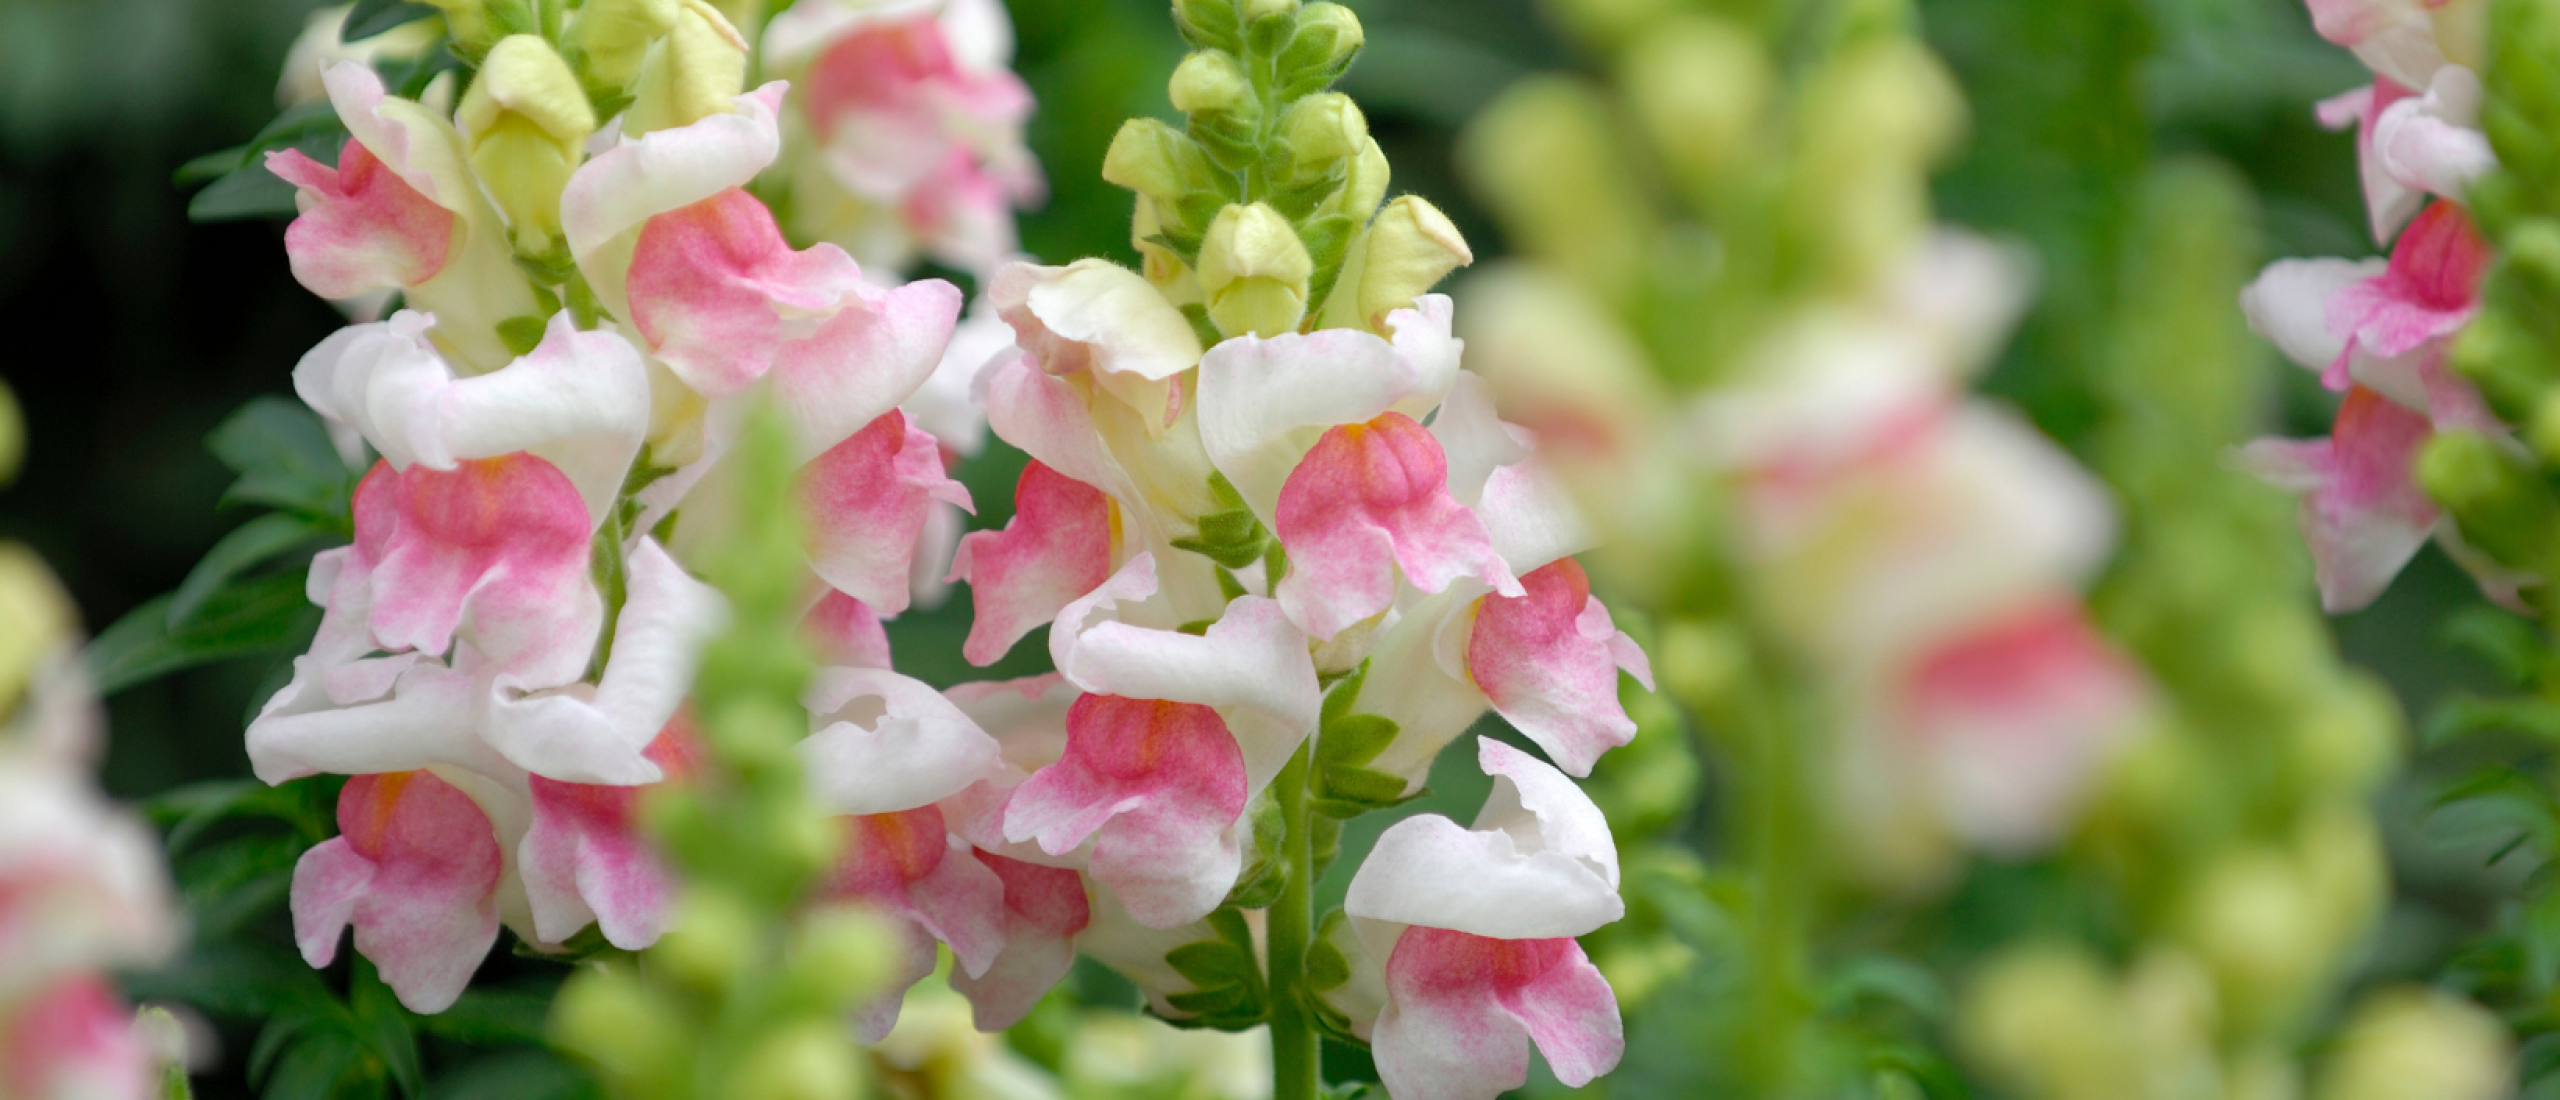 Snapdragon: a fun and fragrant flower in the garden